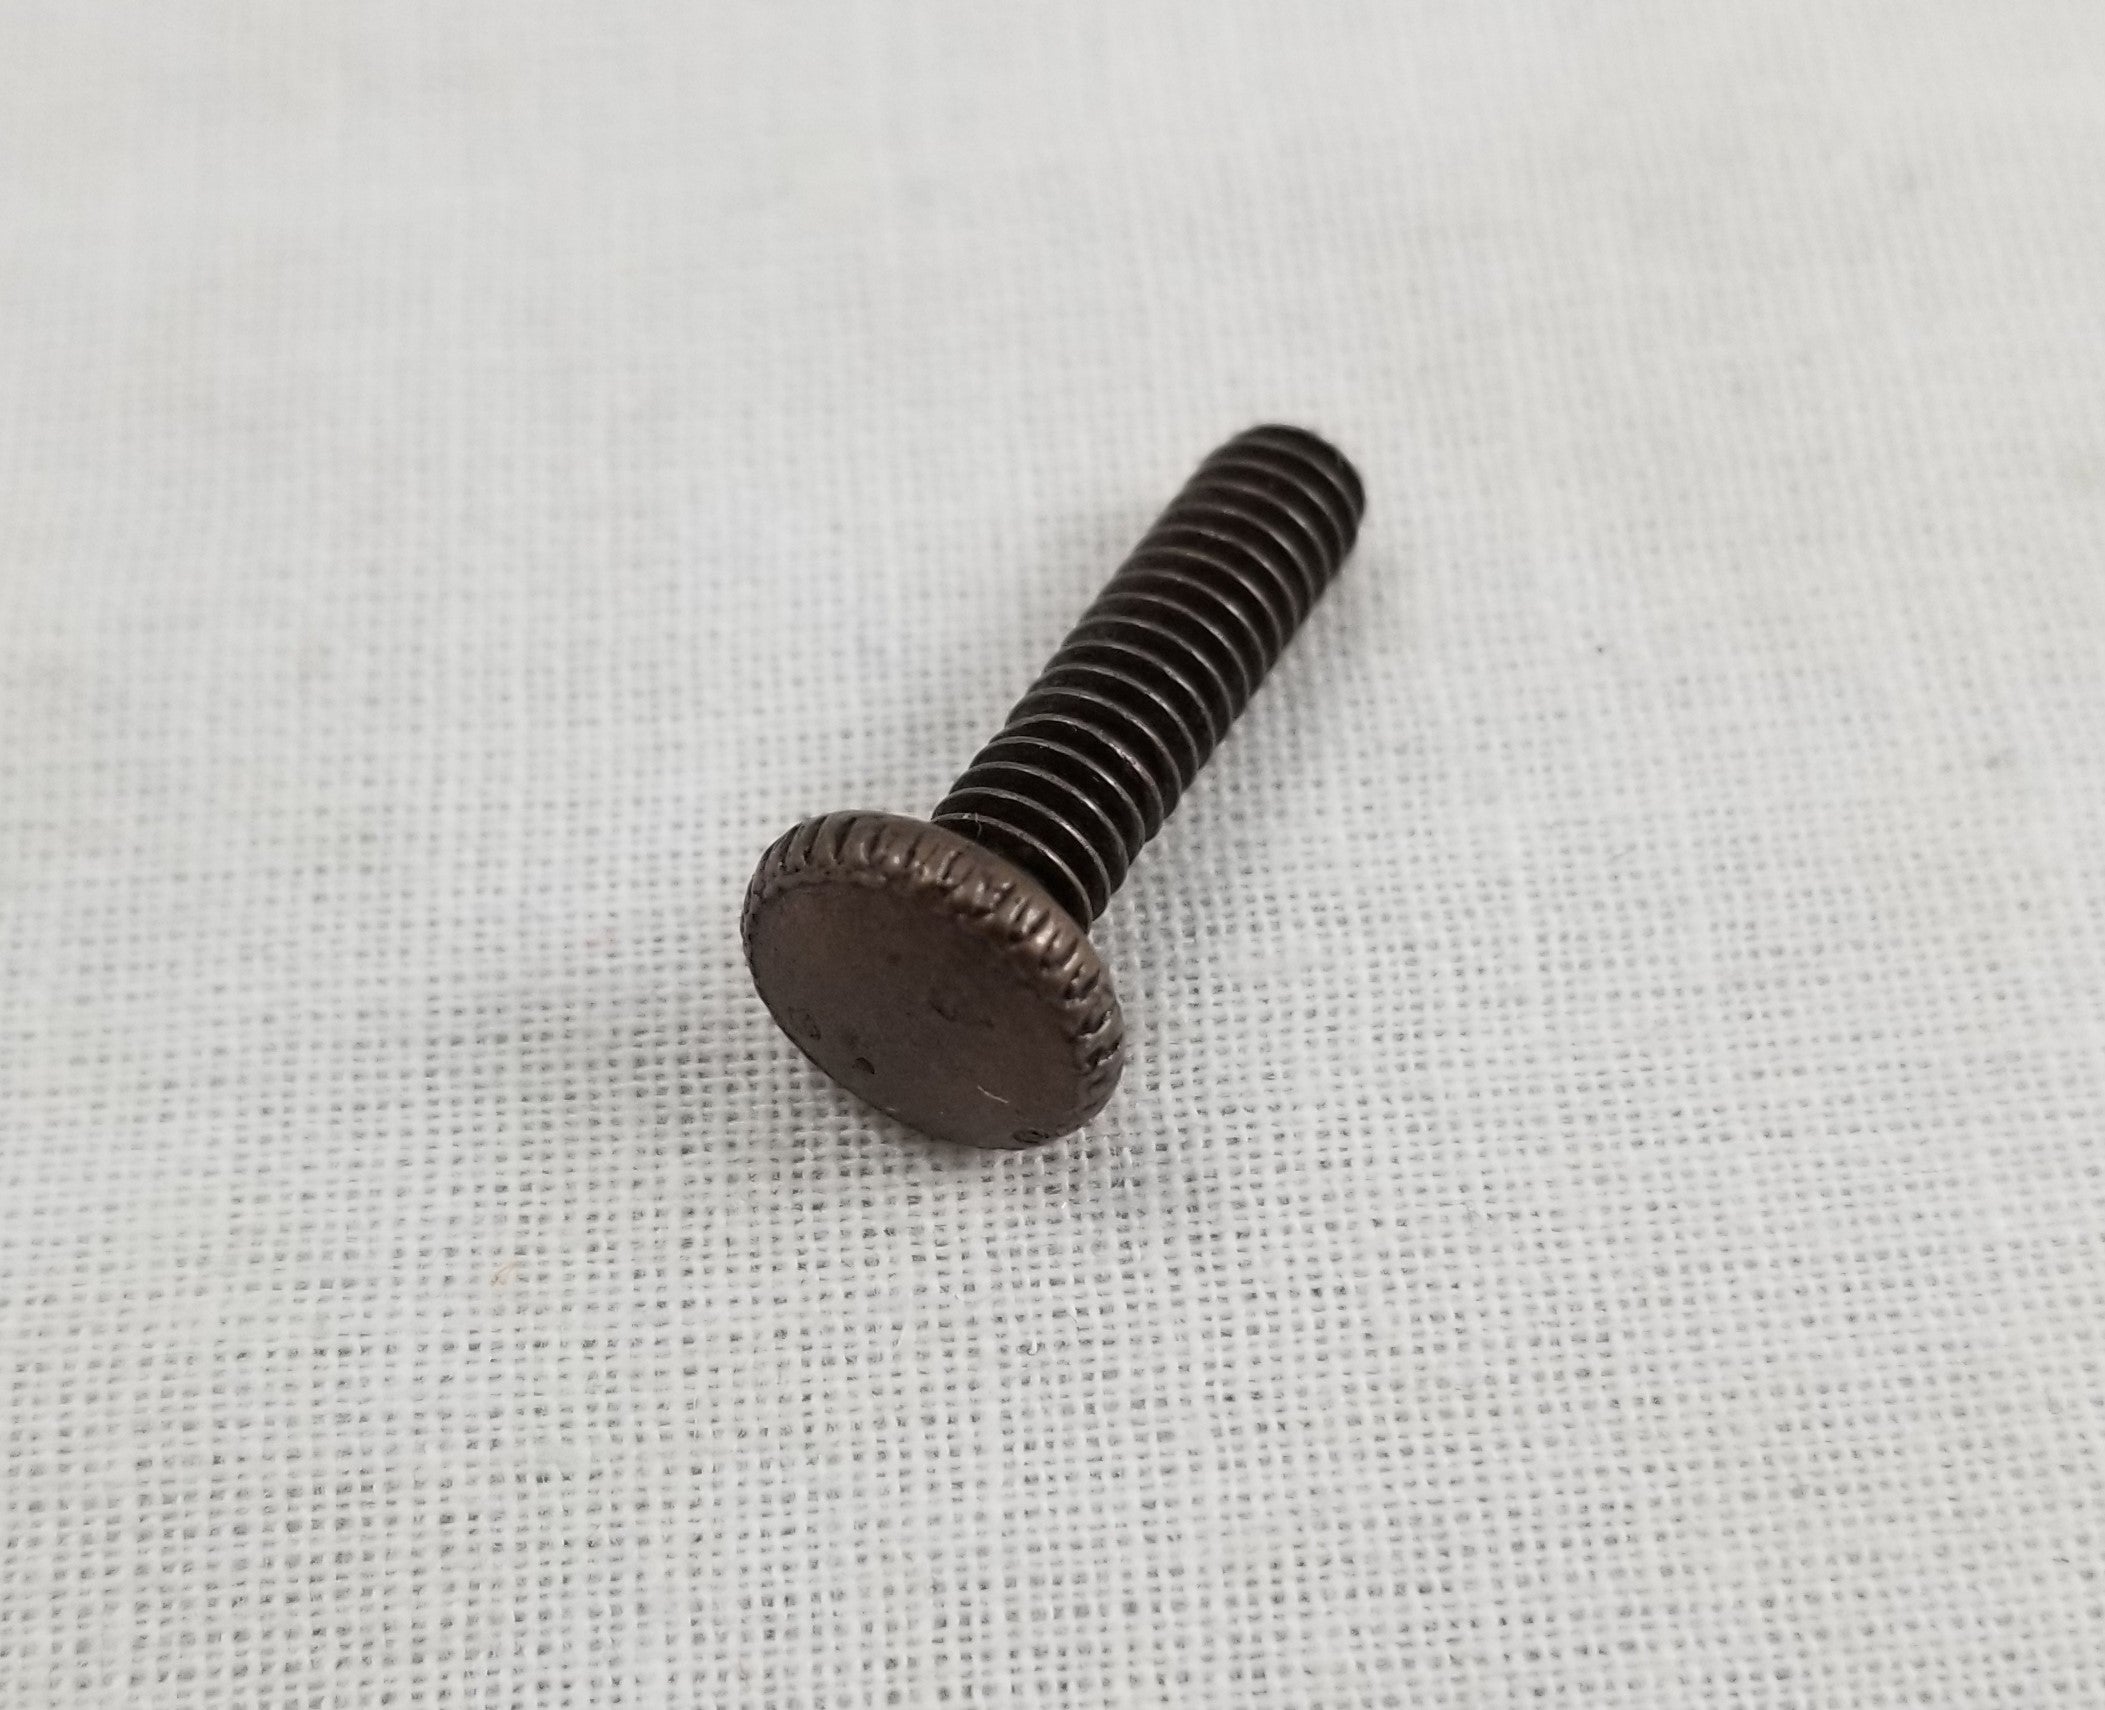 5/8" Antique Brass Plated - Knurled Head Screw for all holders - 8/32"